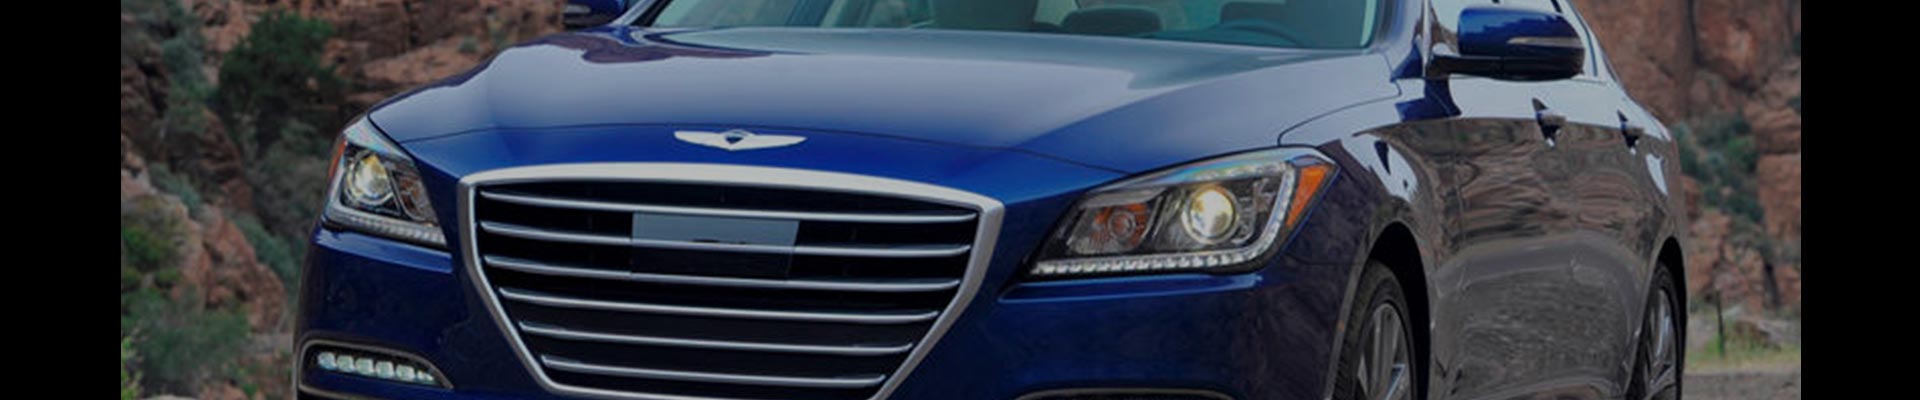 Shop Replacement and OEM 2010 Hyundai Genesis Parts with Discounted Price on the Net